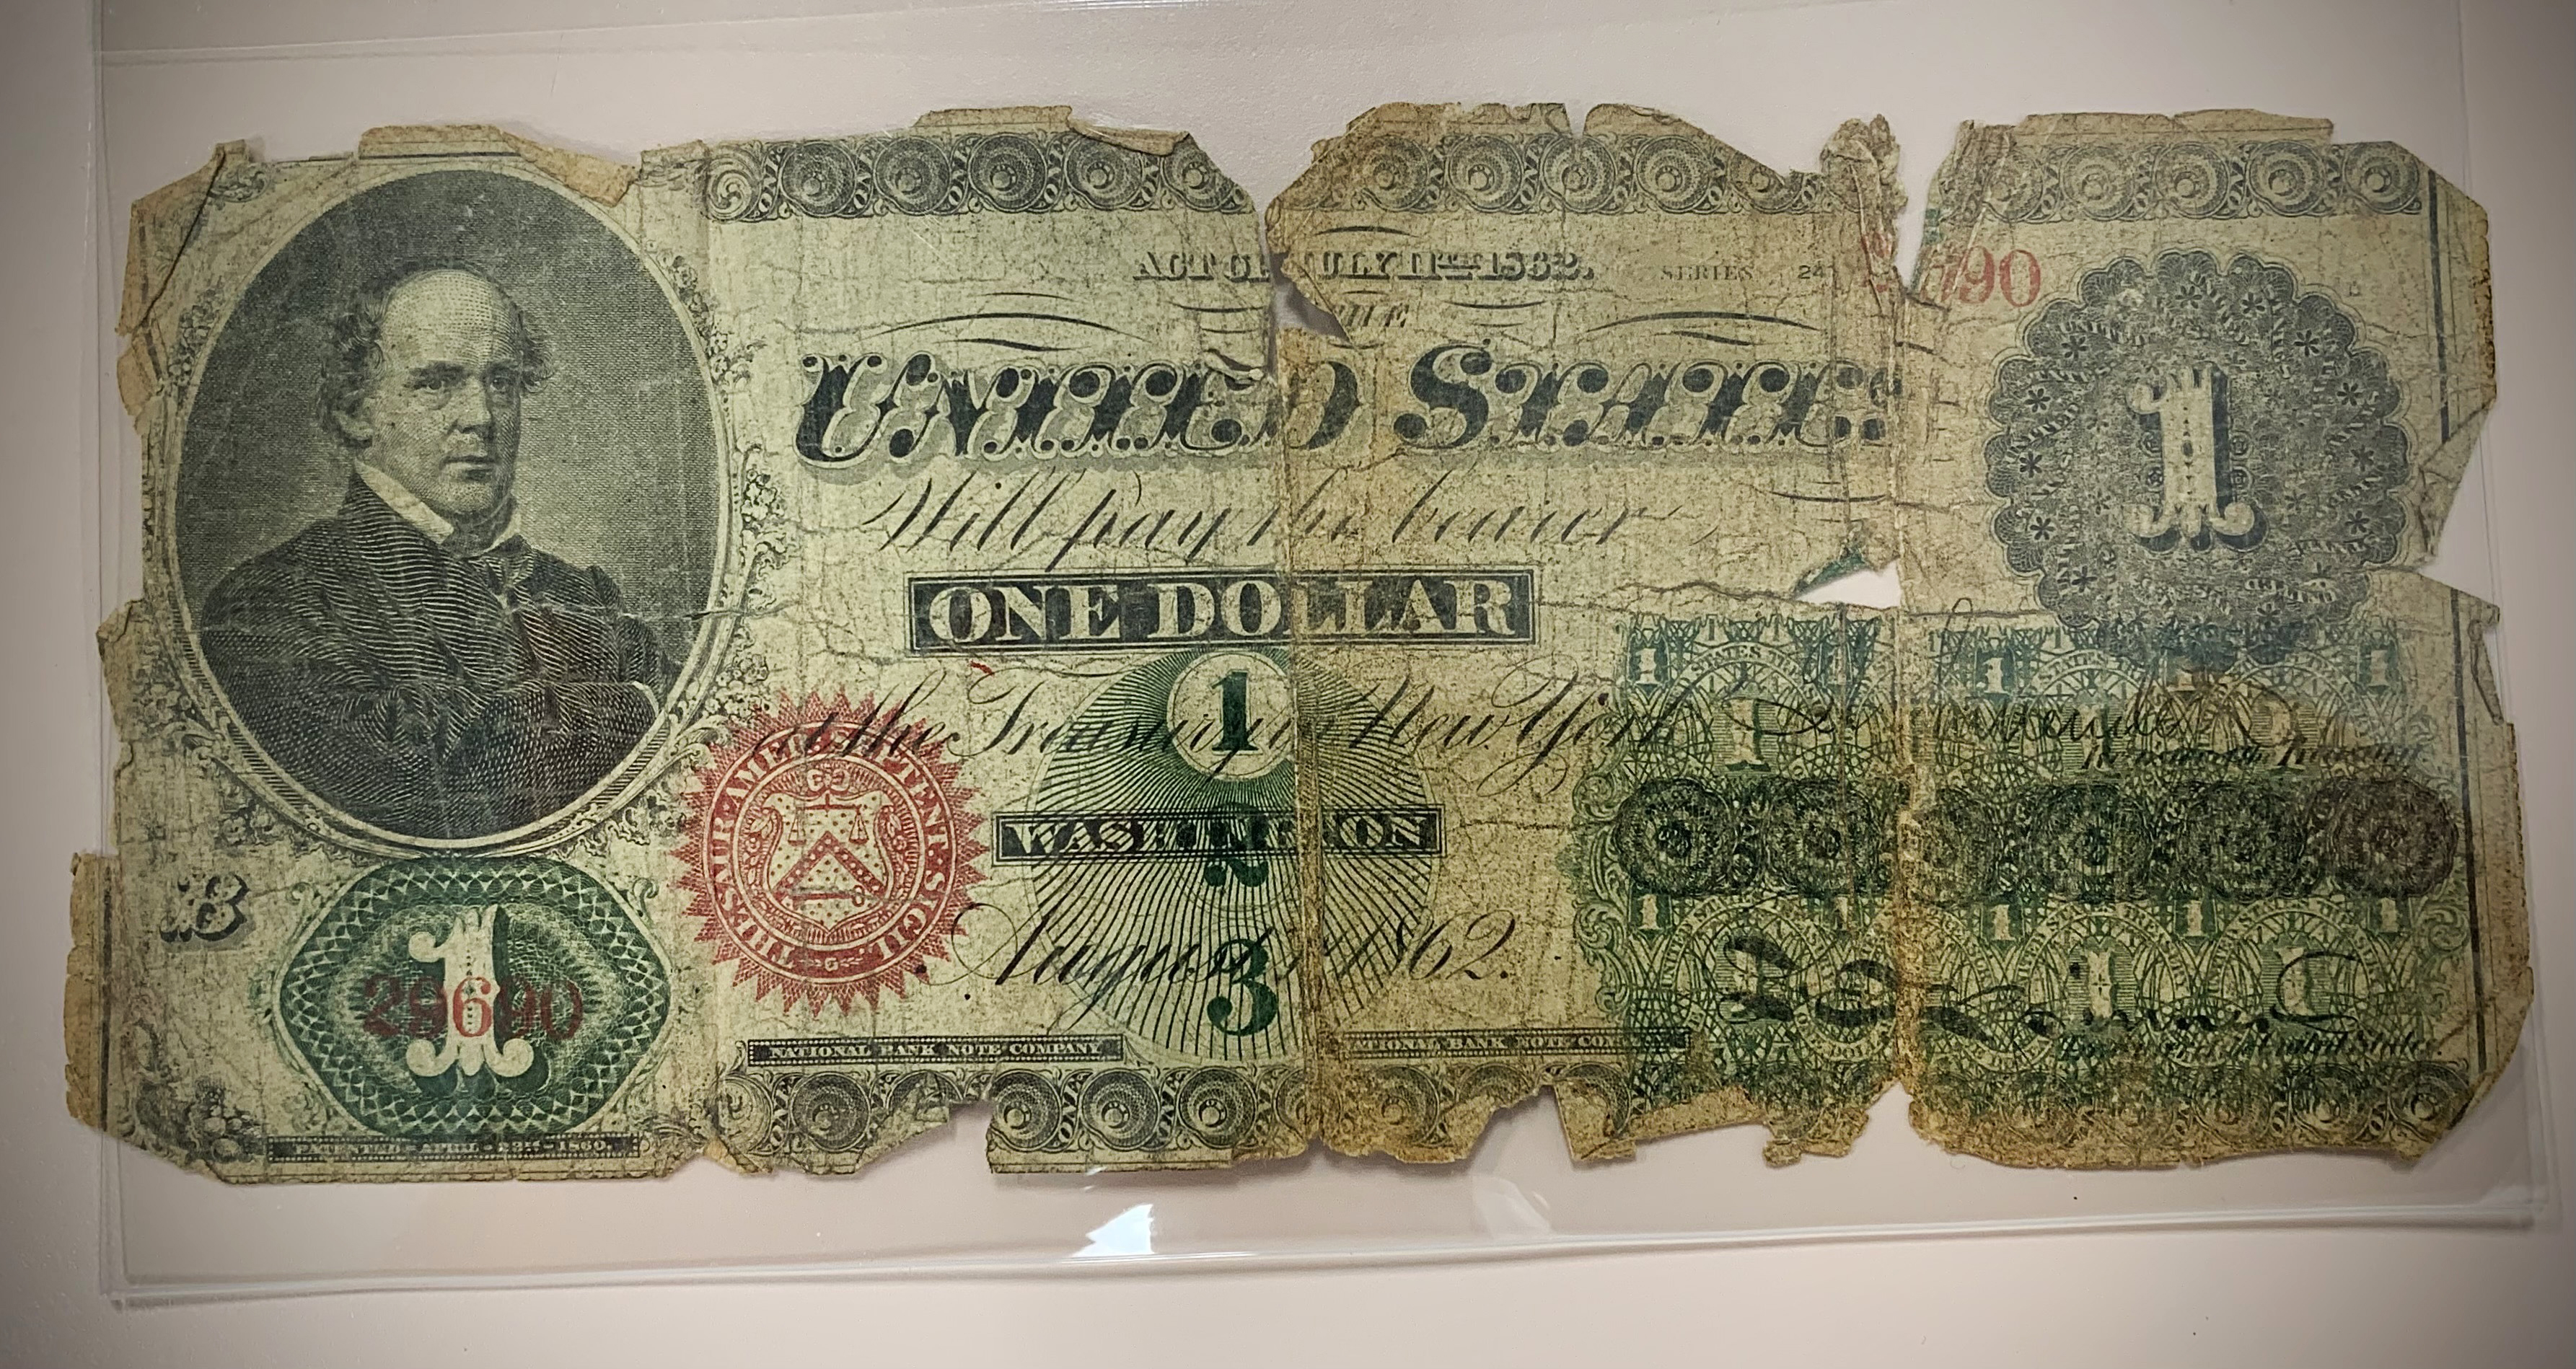 Greene County archivists found demand notes in the United States, or "greenbacks," some of the first paper money printed in the United States, in the archives of Greenewood Manor after the retirement home closed last year.  MARSHALL GORBYSTAFF